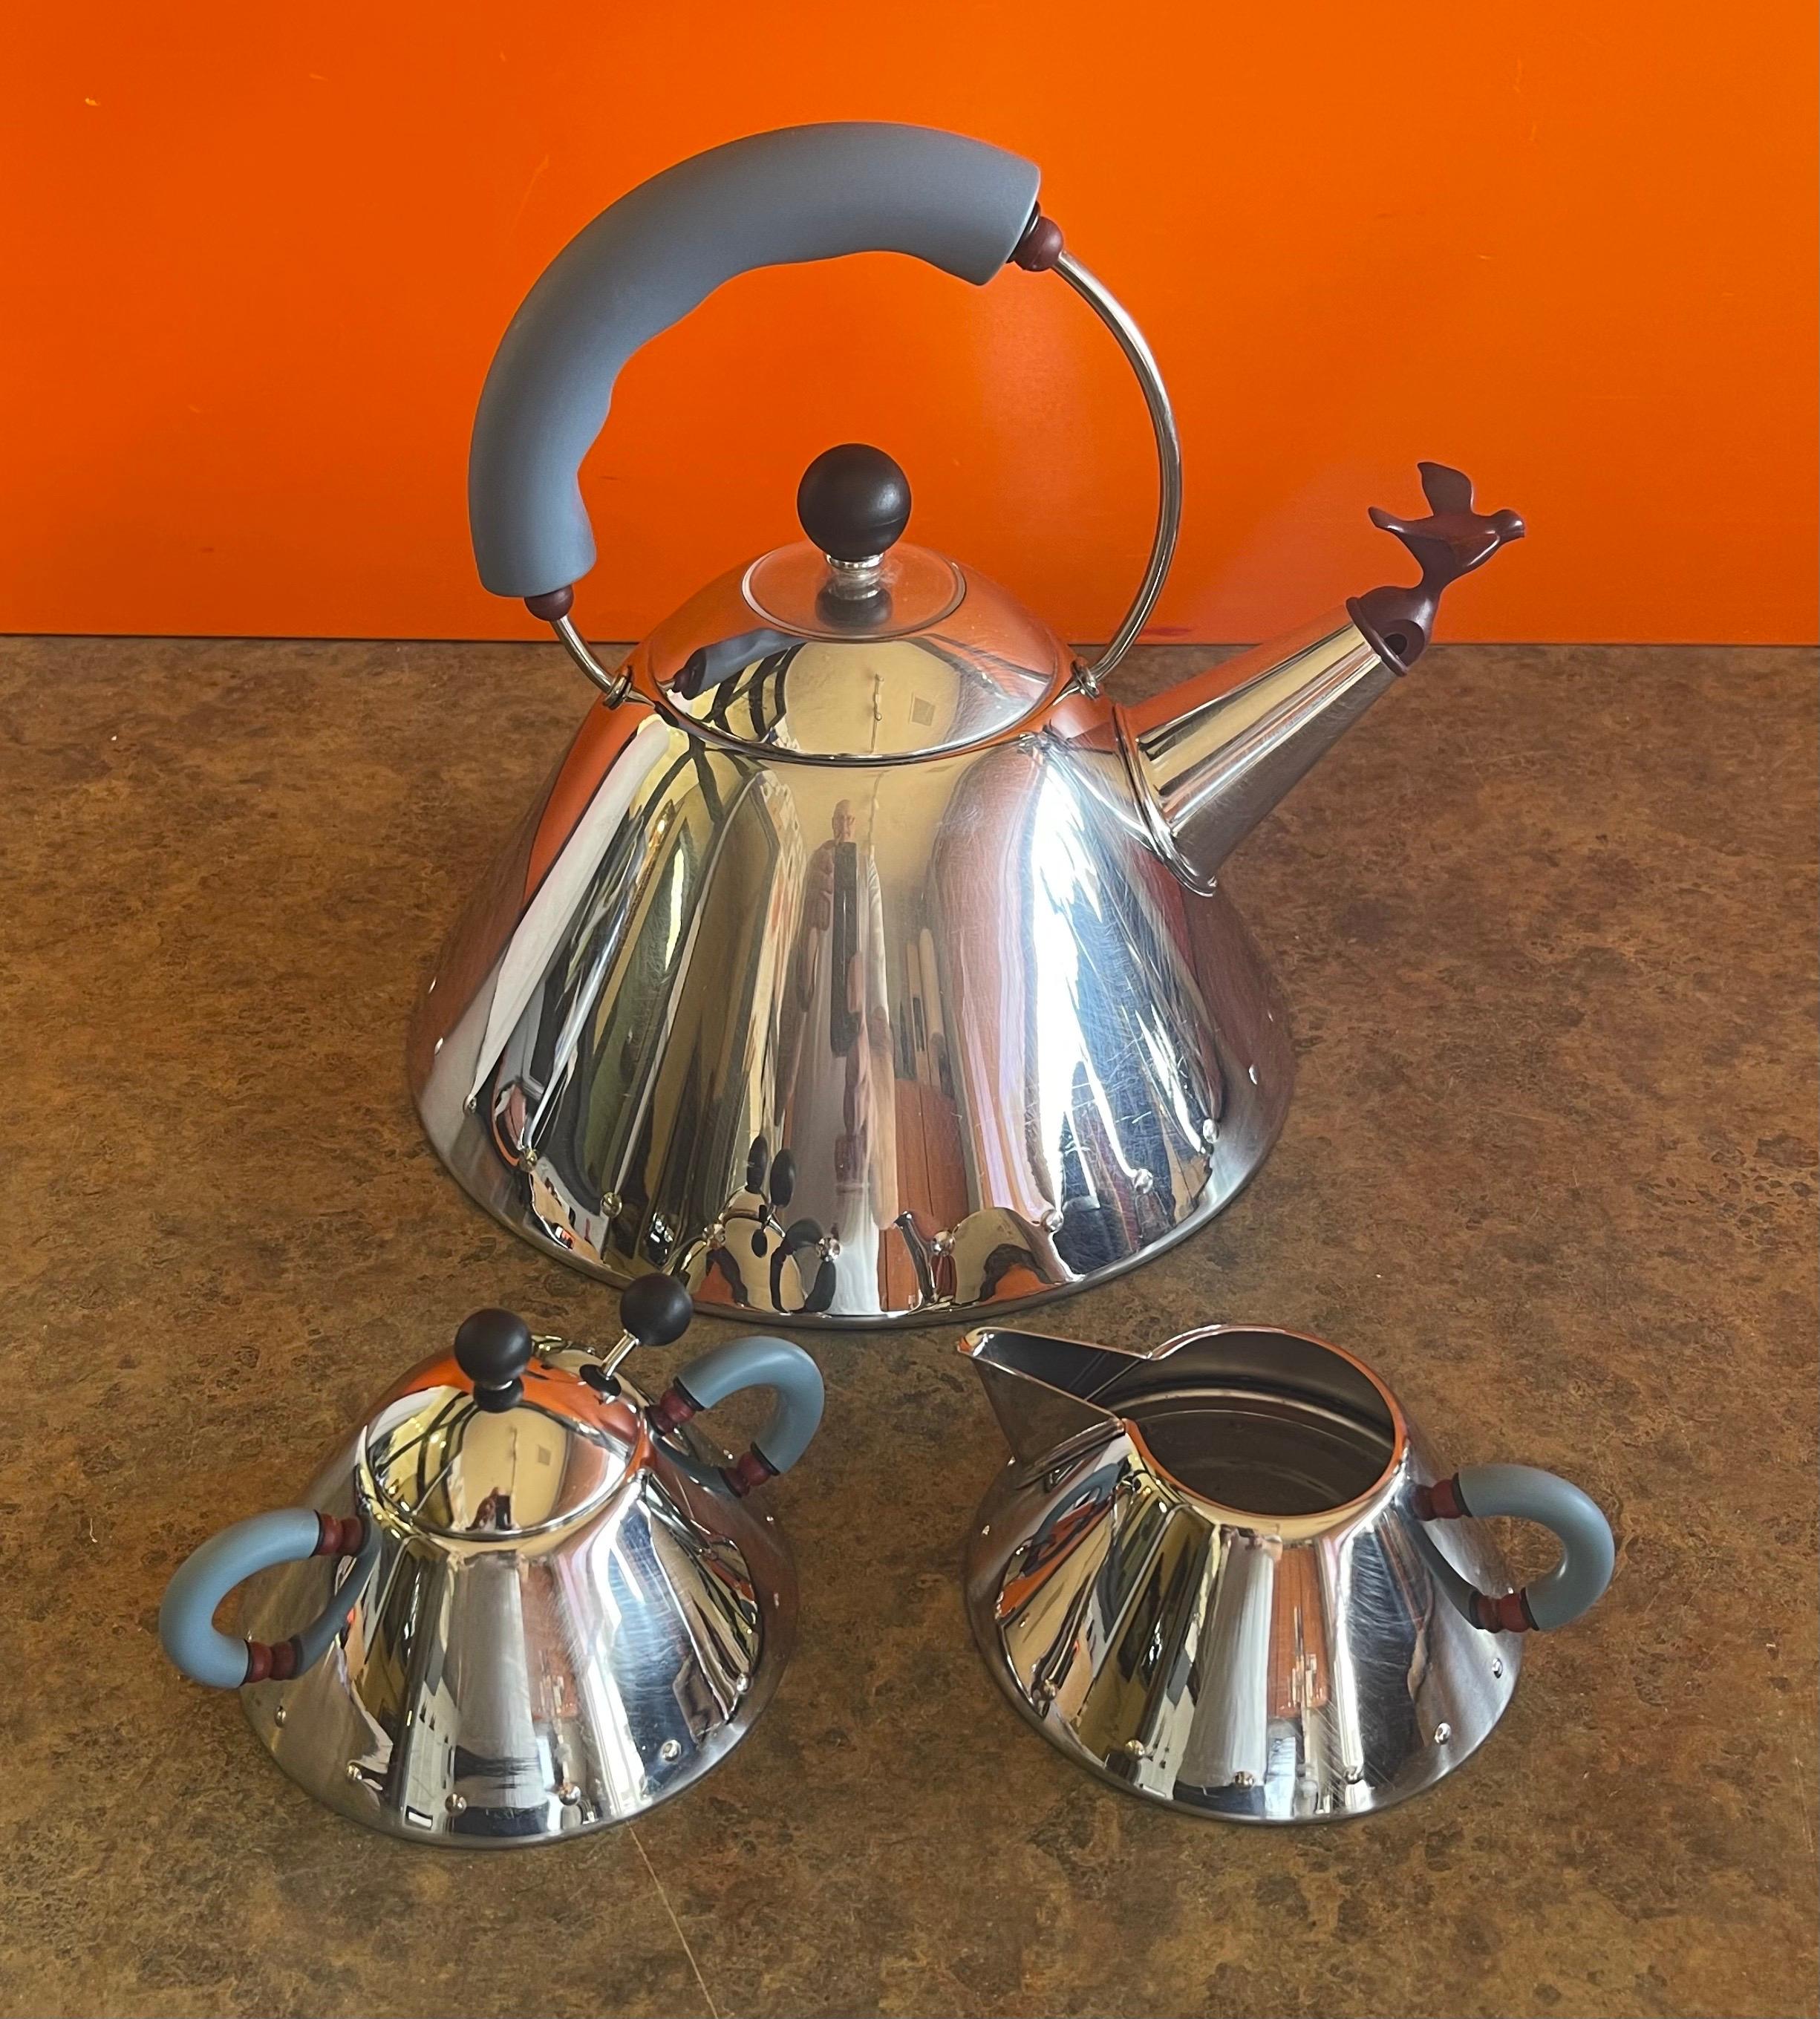 A classic postmodern / Memphis era teapot with cream & sugar designed by Michael Graves for Alessi, circa the 1980s. The set is in good vintage condition and measures 10.25